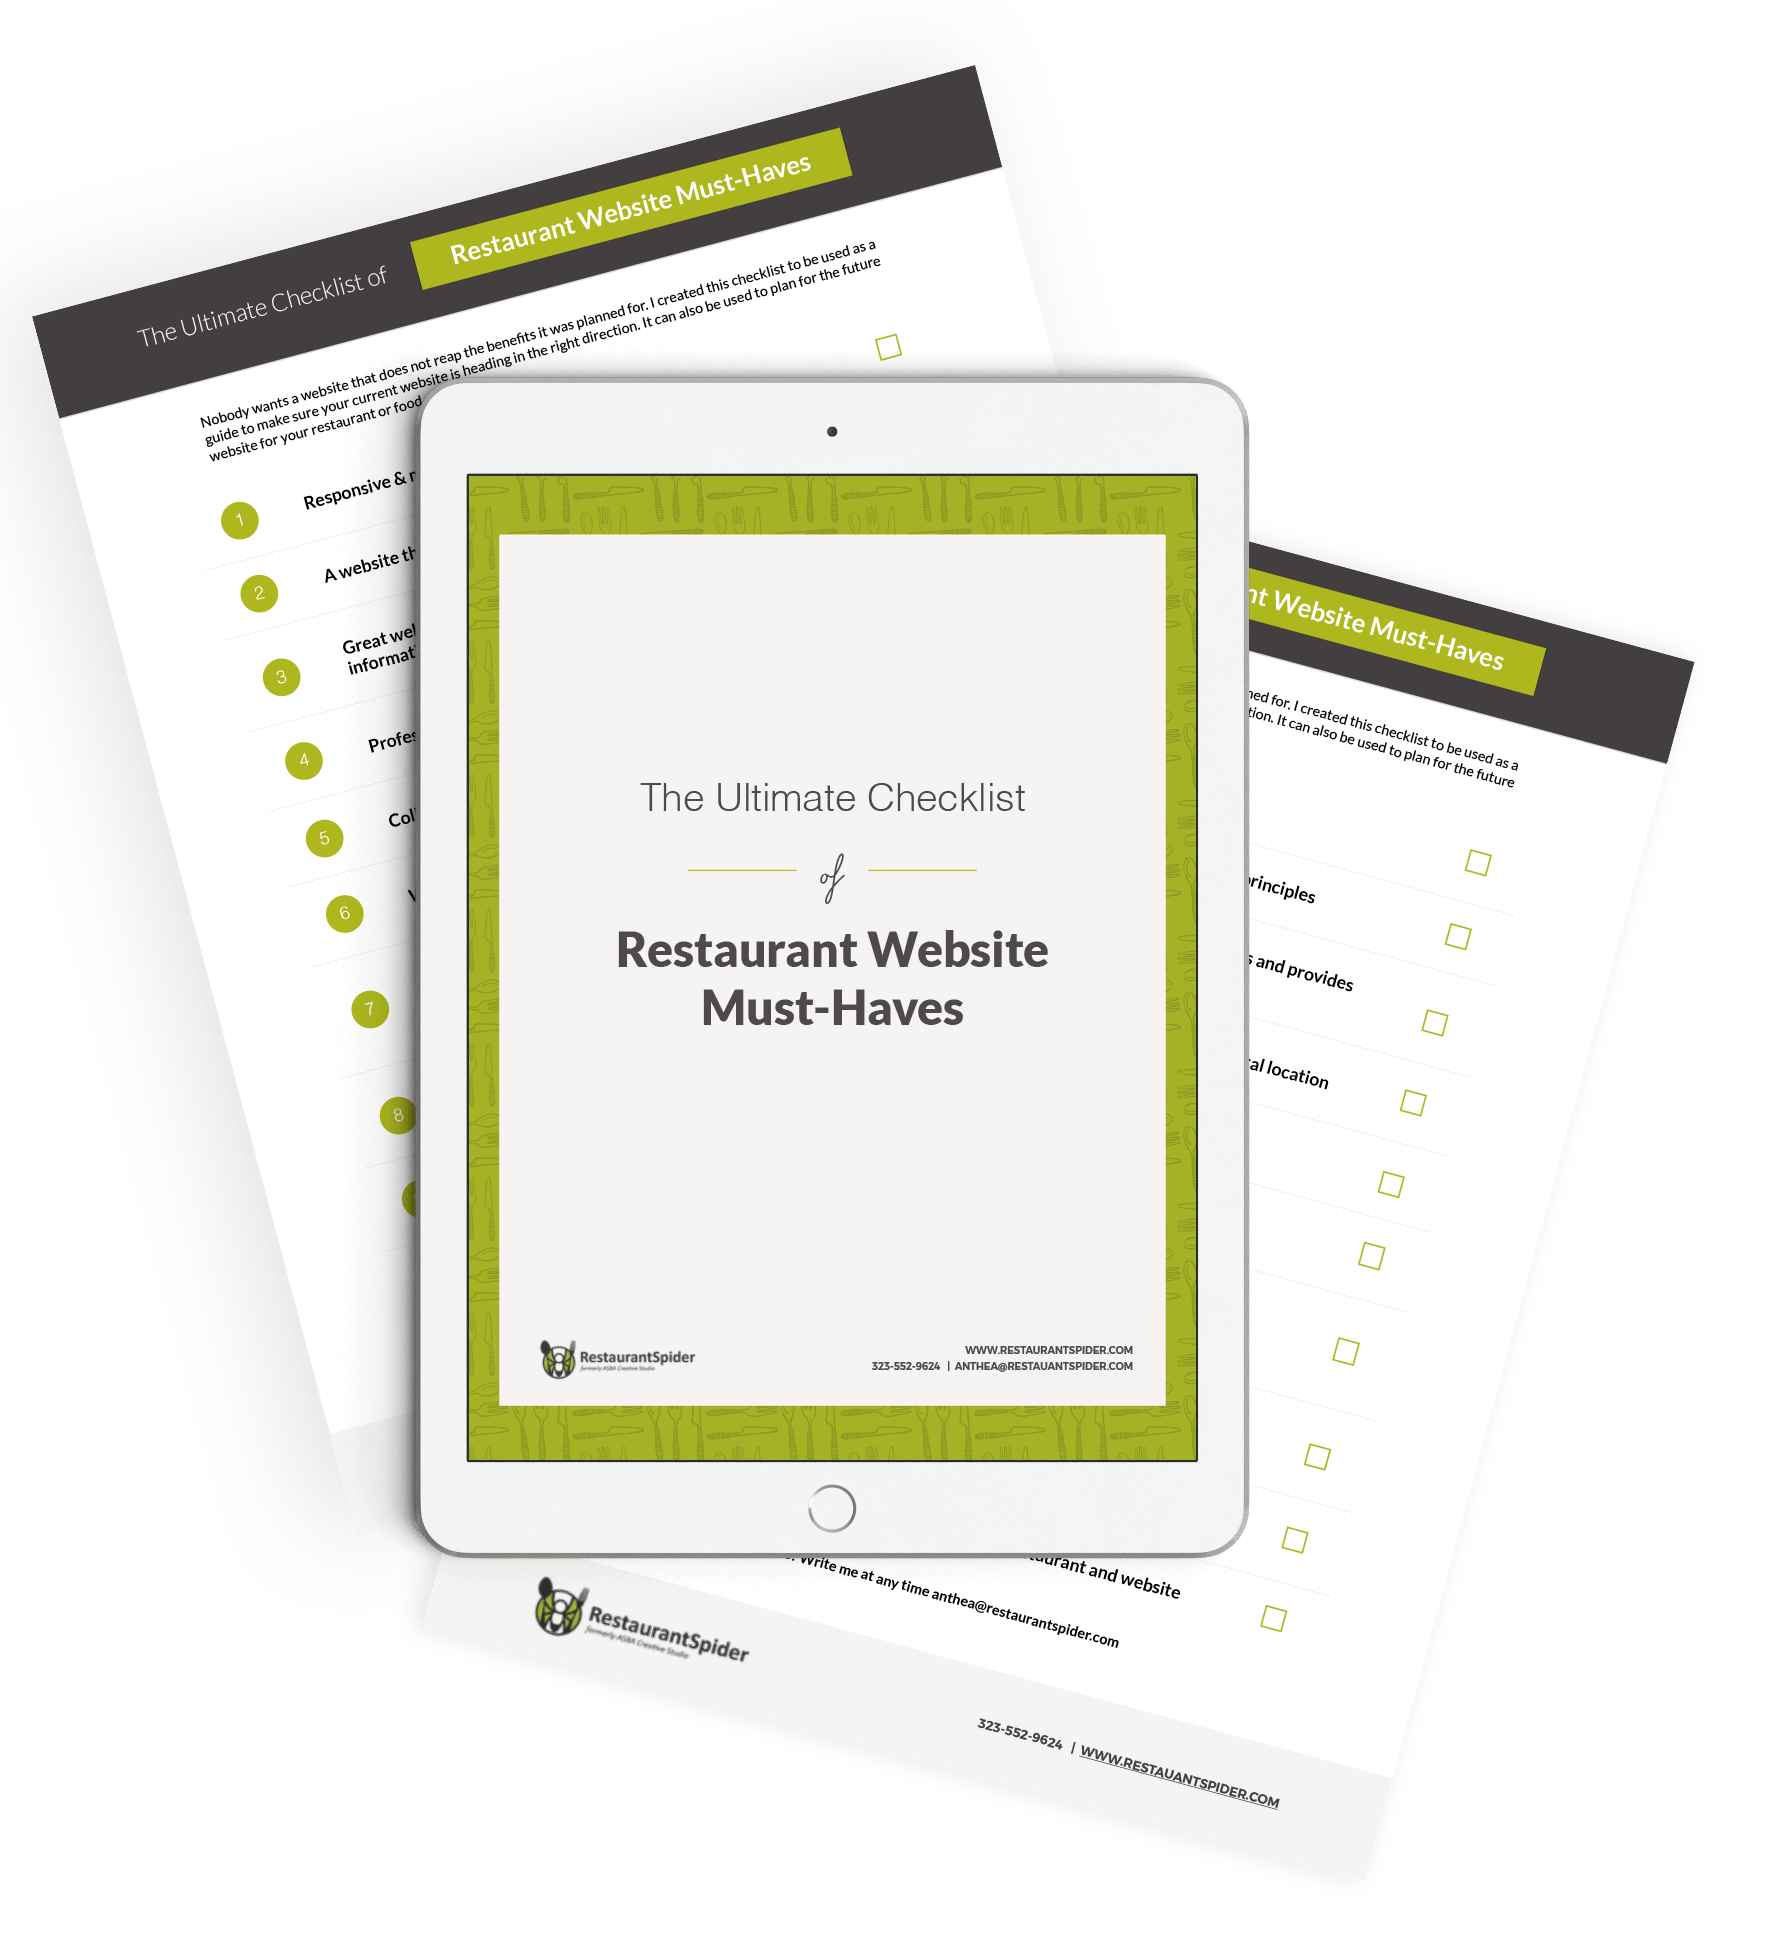 Download your free list of restaurant website must-haves